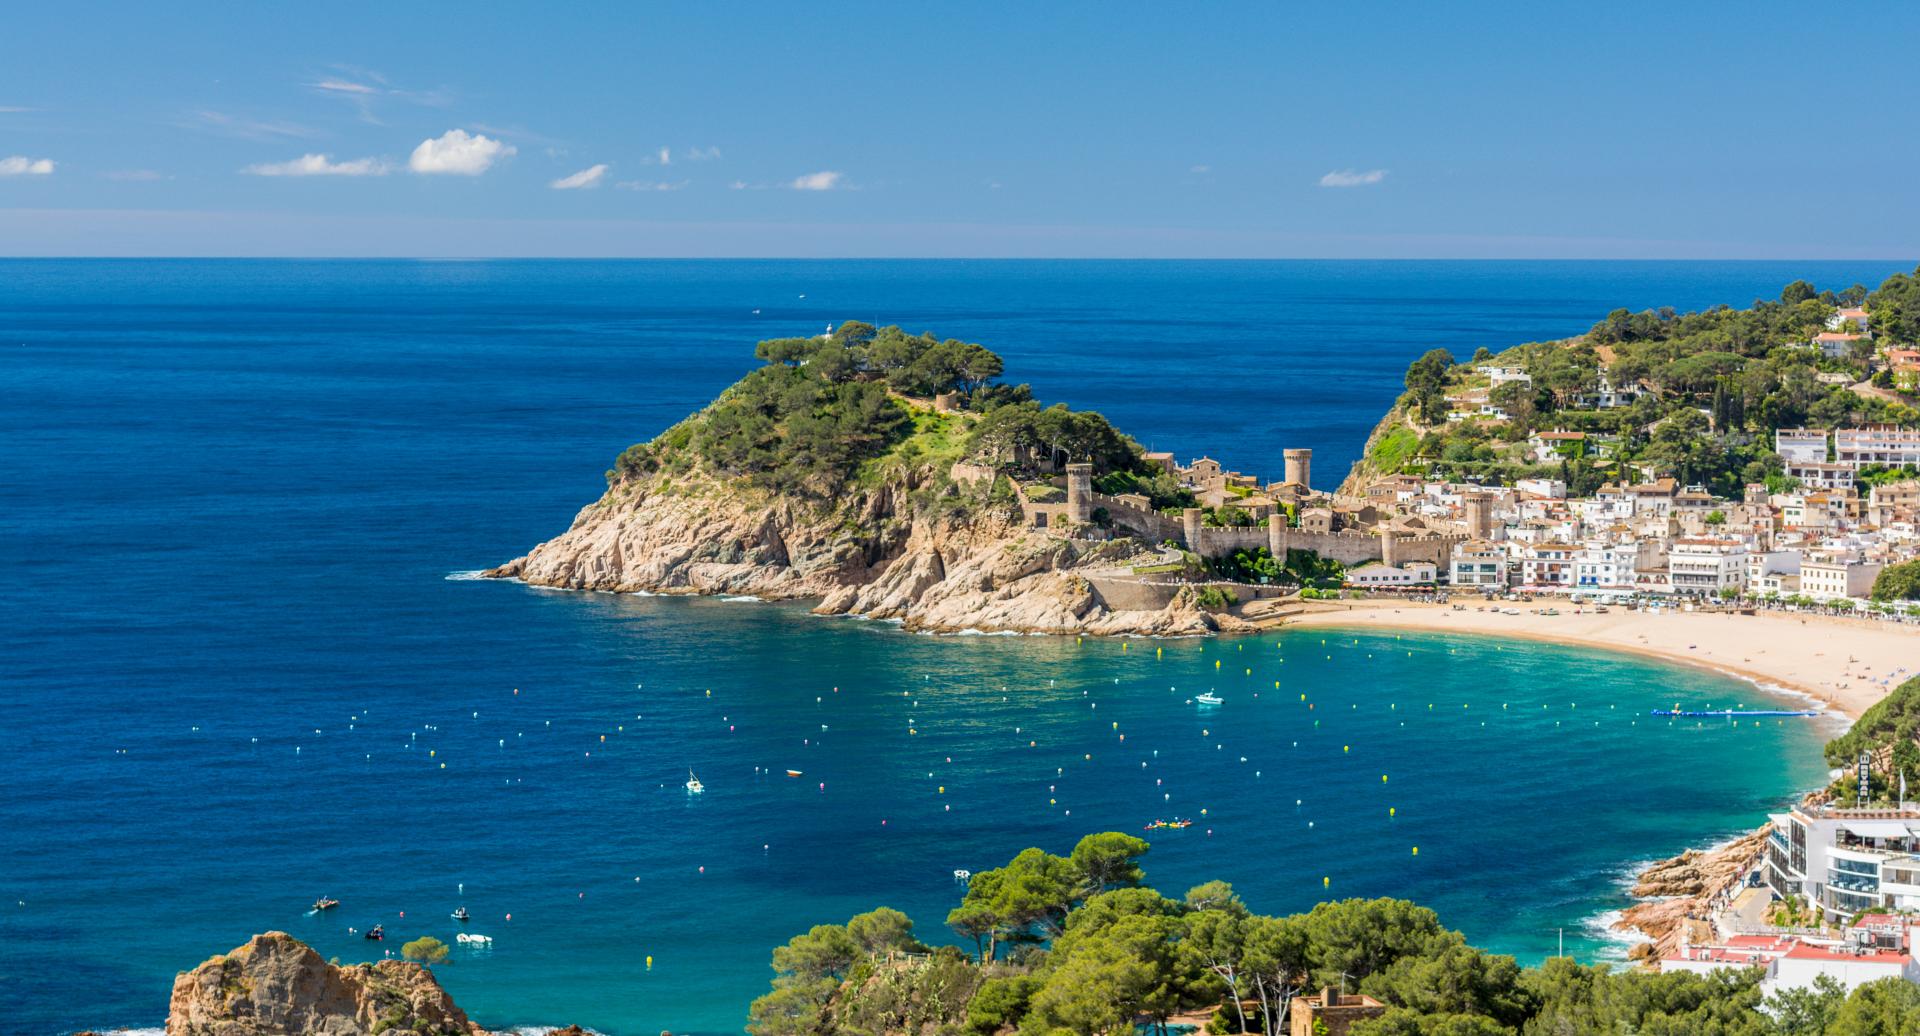 Hotel for filming on the Costa Brava